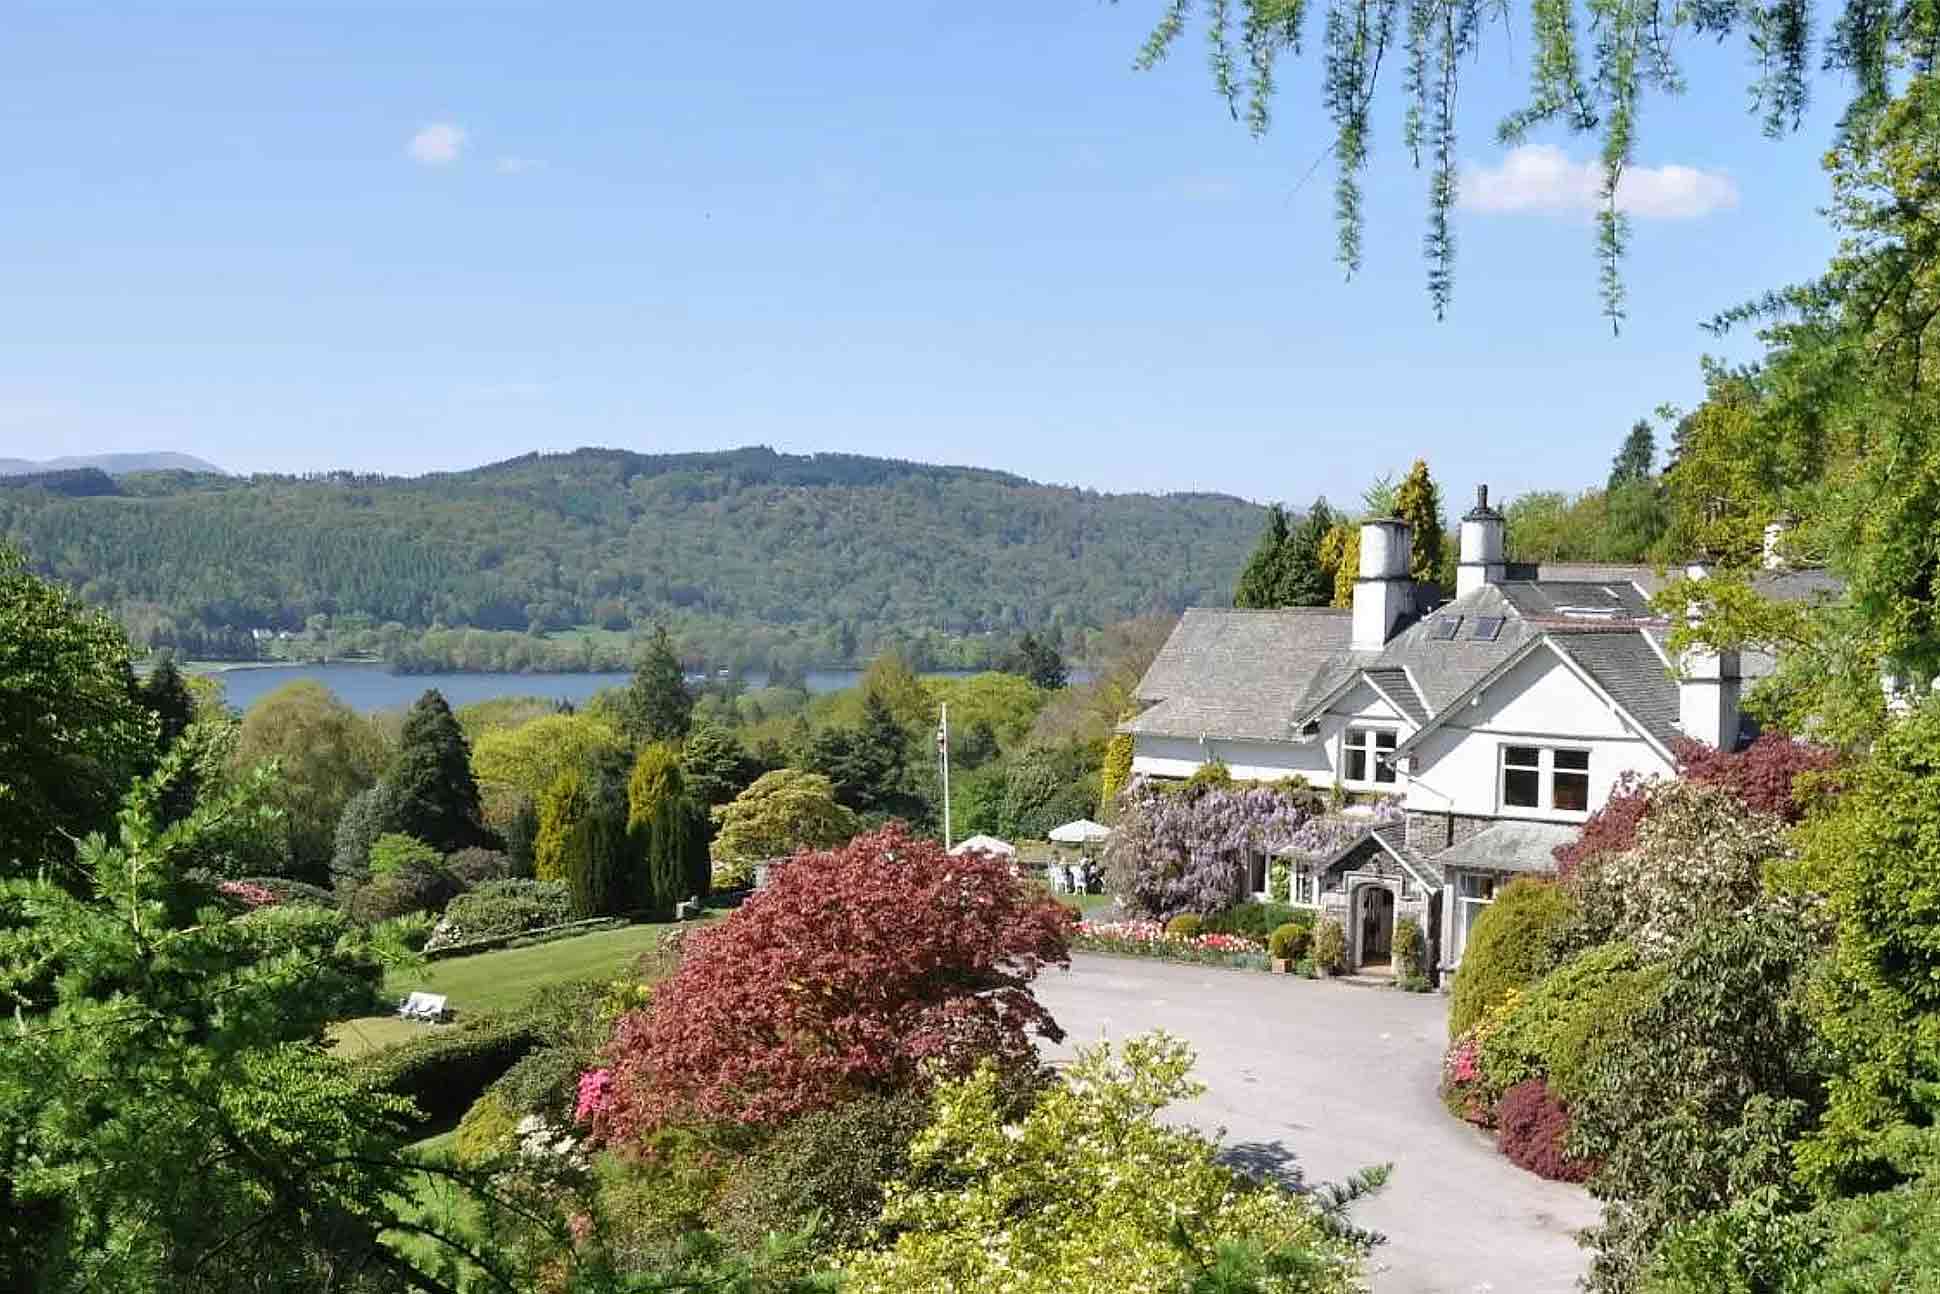 Lindeth Fell Country House <br> Windermere, United Kingdom